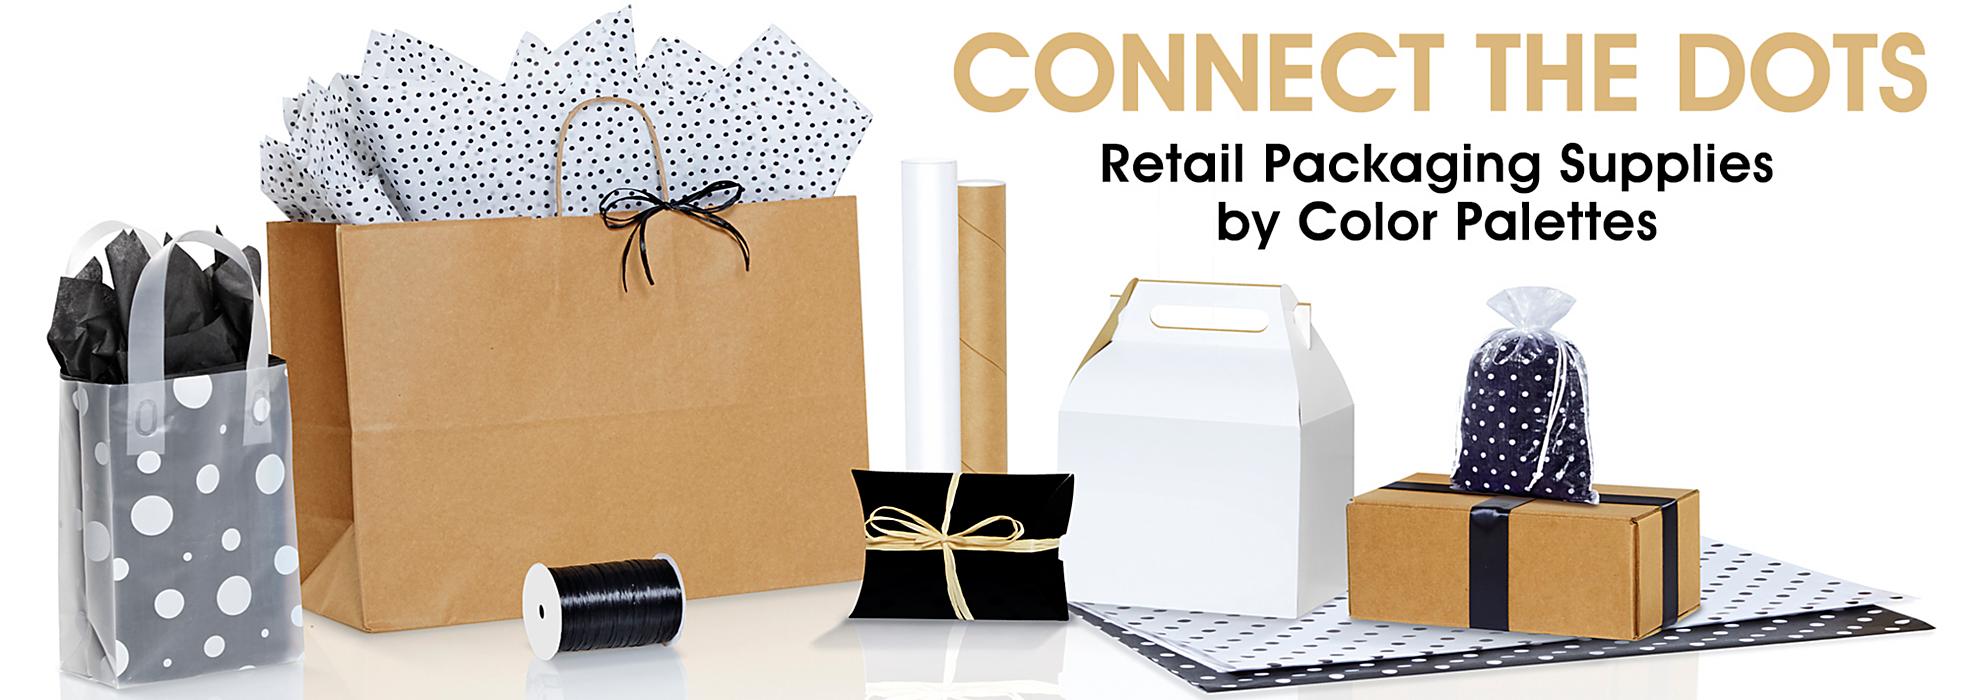 Connect The Dots - Retail Packaging Supplies by Color Palettes